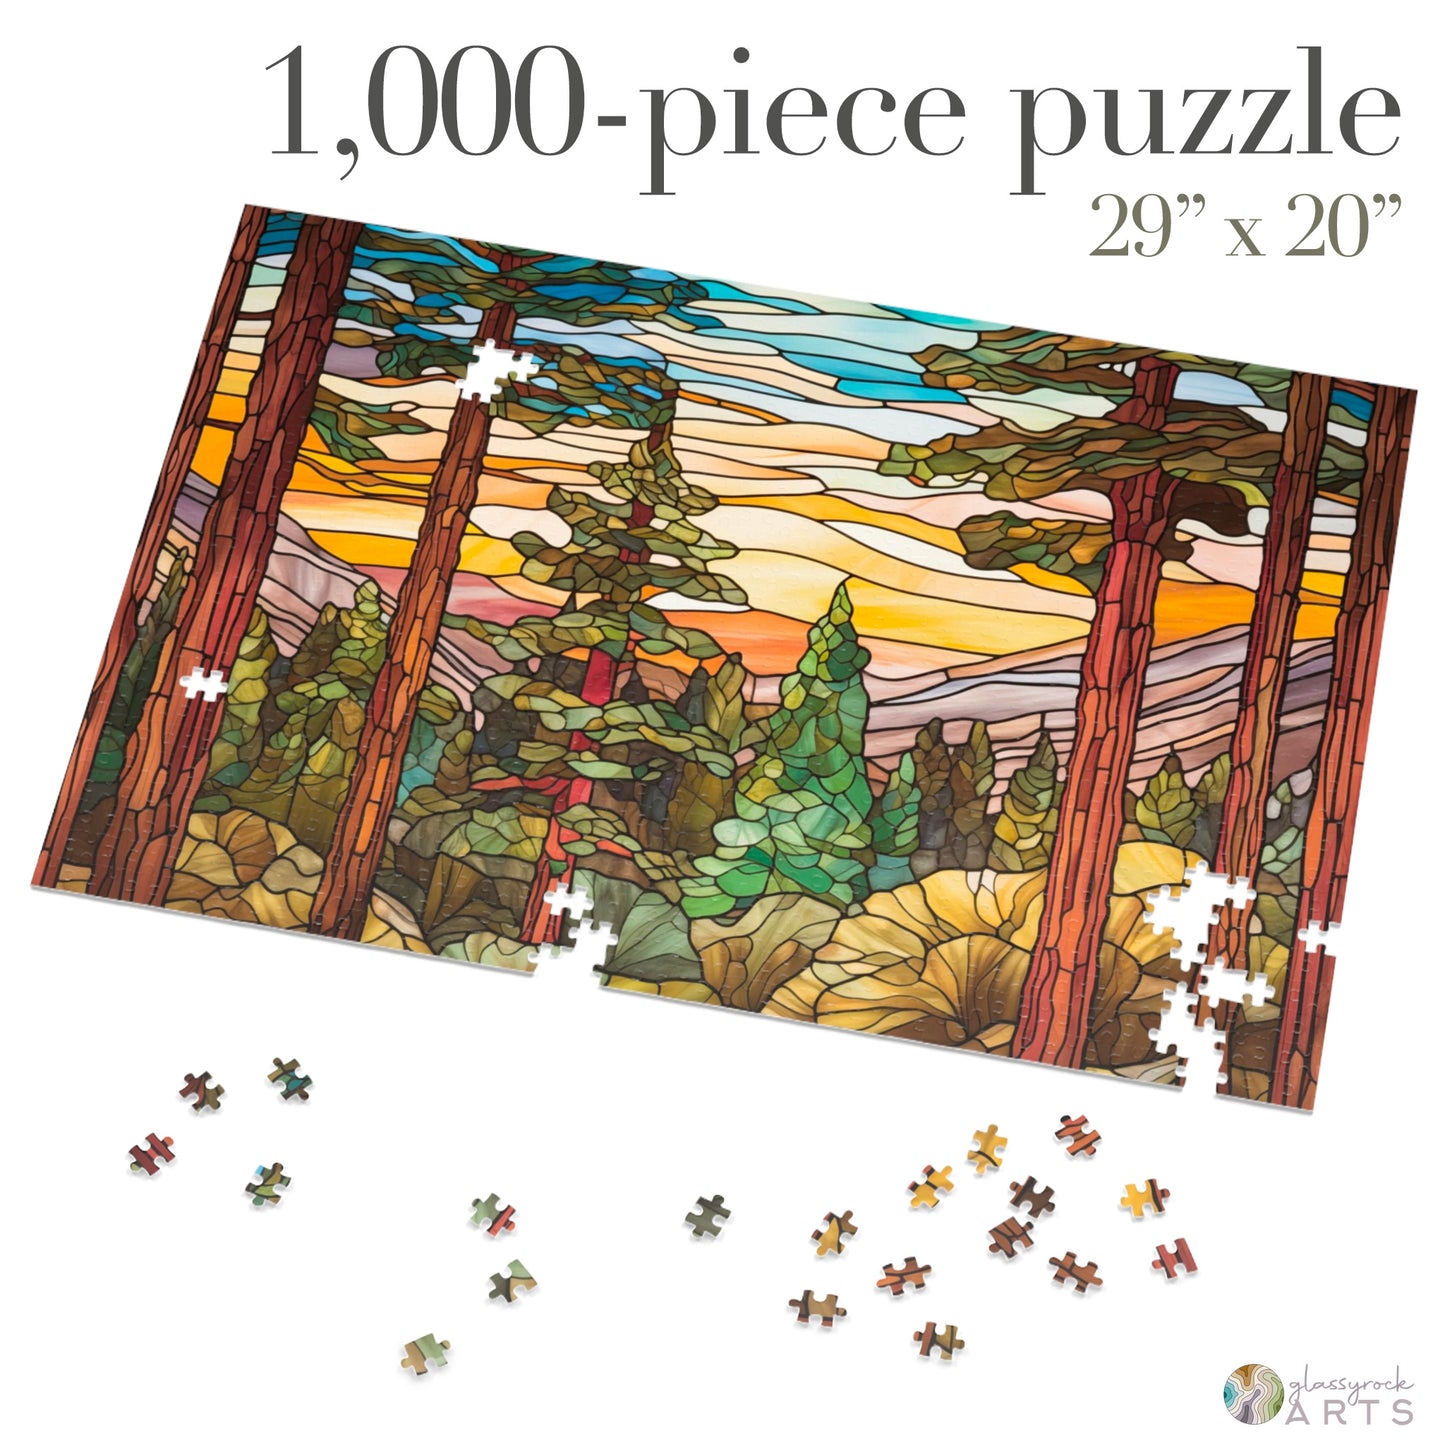 Stained Glass Sequoia Forest Jigsaw Puzzle